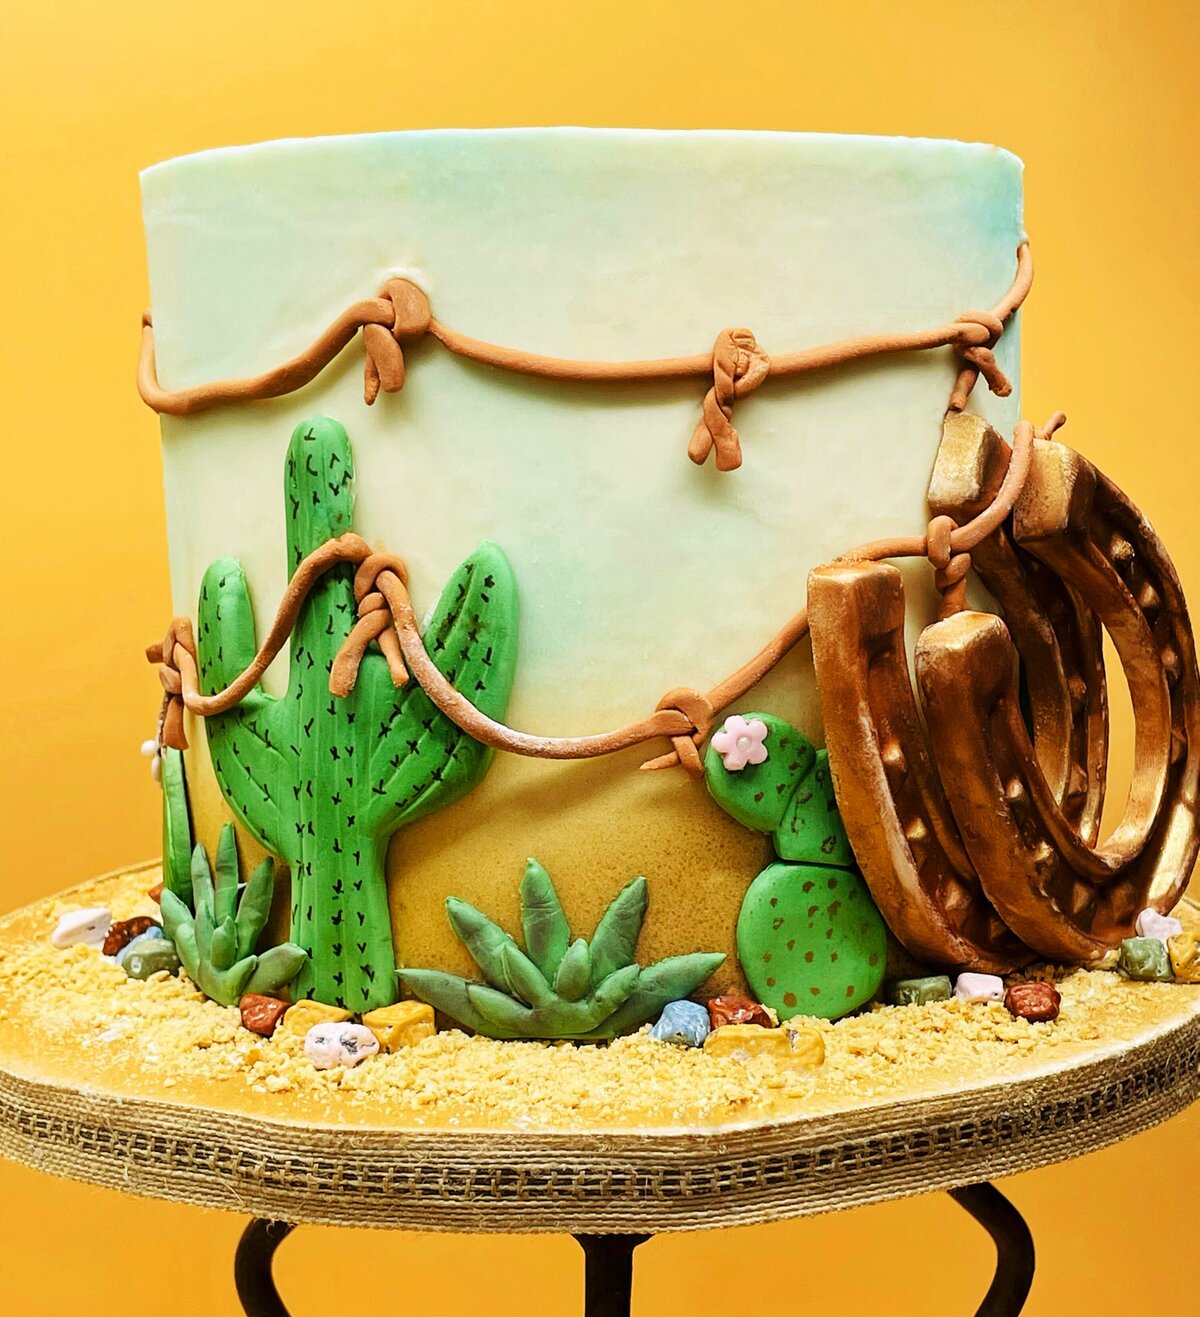 Single tier wedding cake with cowboy design. Design elements include chocolate horseshoes, barbed wire, and succulents against a painted desert sky.